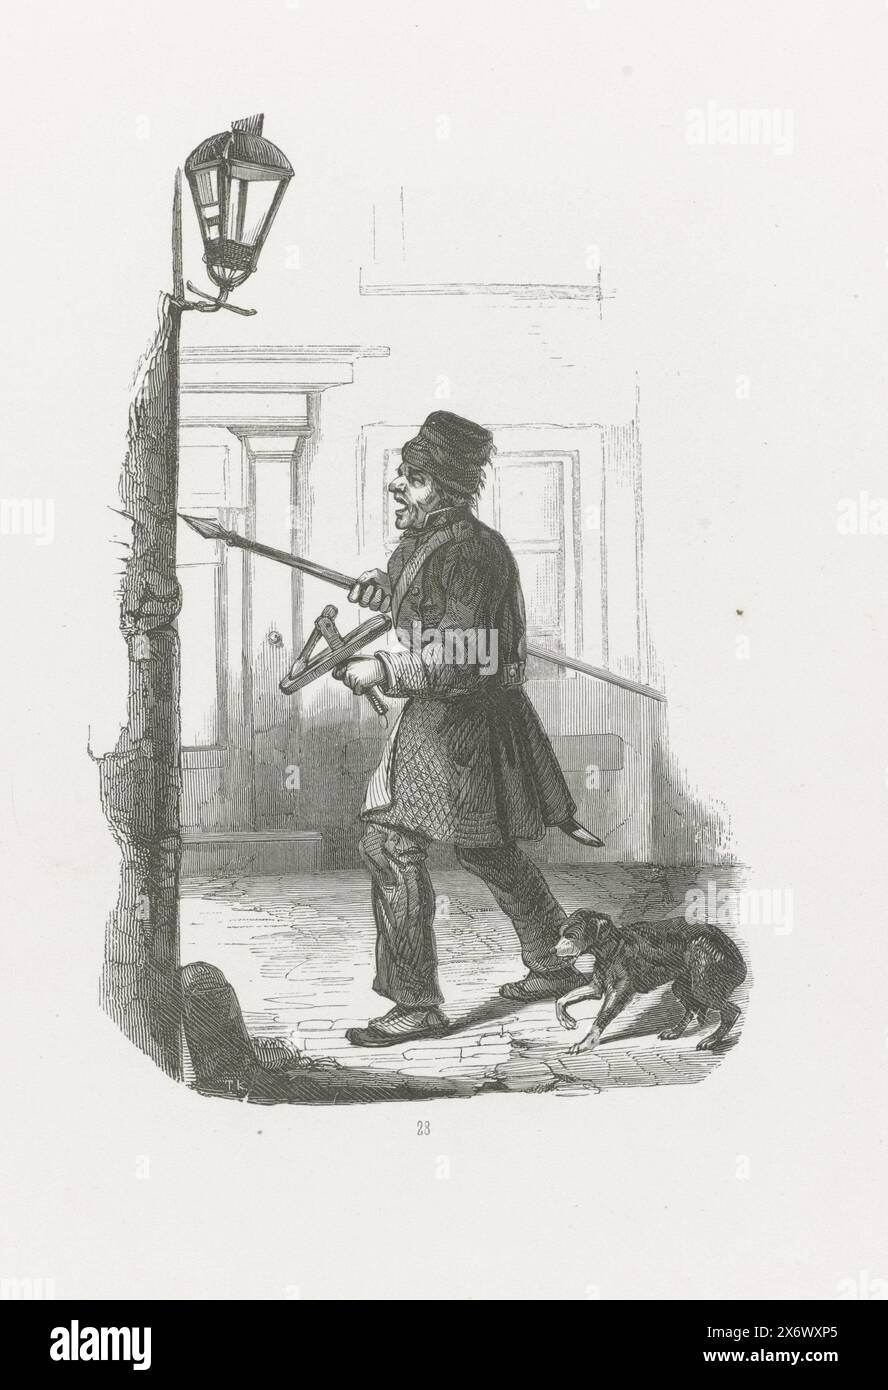 The clapperman of The Hague, 1840-1841, The clapperman of The Hague. Man shouting while walking through a street with a club, lance and dog. In a folded cover with the text about the clapperman. Separate copy of an illustration from: a book with character sketches, professions and costumes of Dutch folk types from 1841. Numbered: 28., print, print maker: Henry Brown, after drawing by: Herman Frederik Carel ten Kate, (mentioned on object), Netherlands, 1840 - 1841, paper, wood engraving, height c. 275 mm × width c. 182 mm Stock Photo